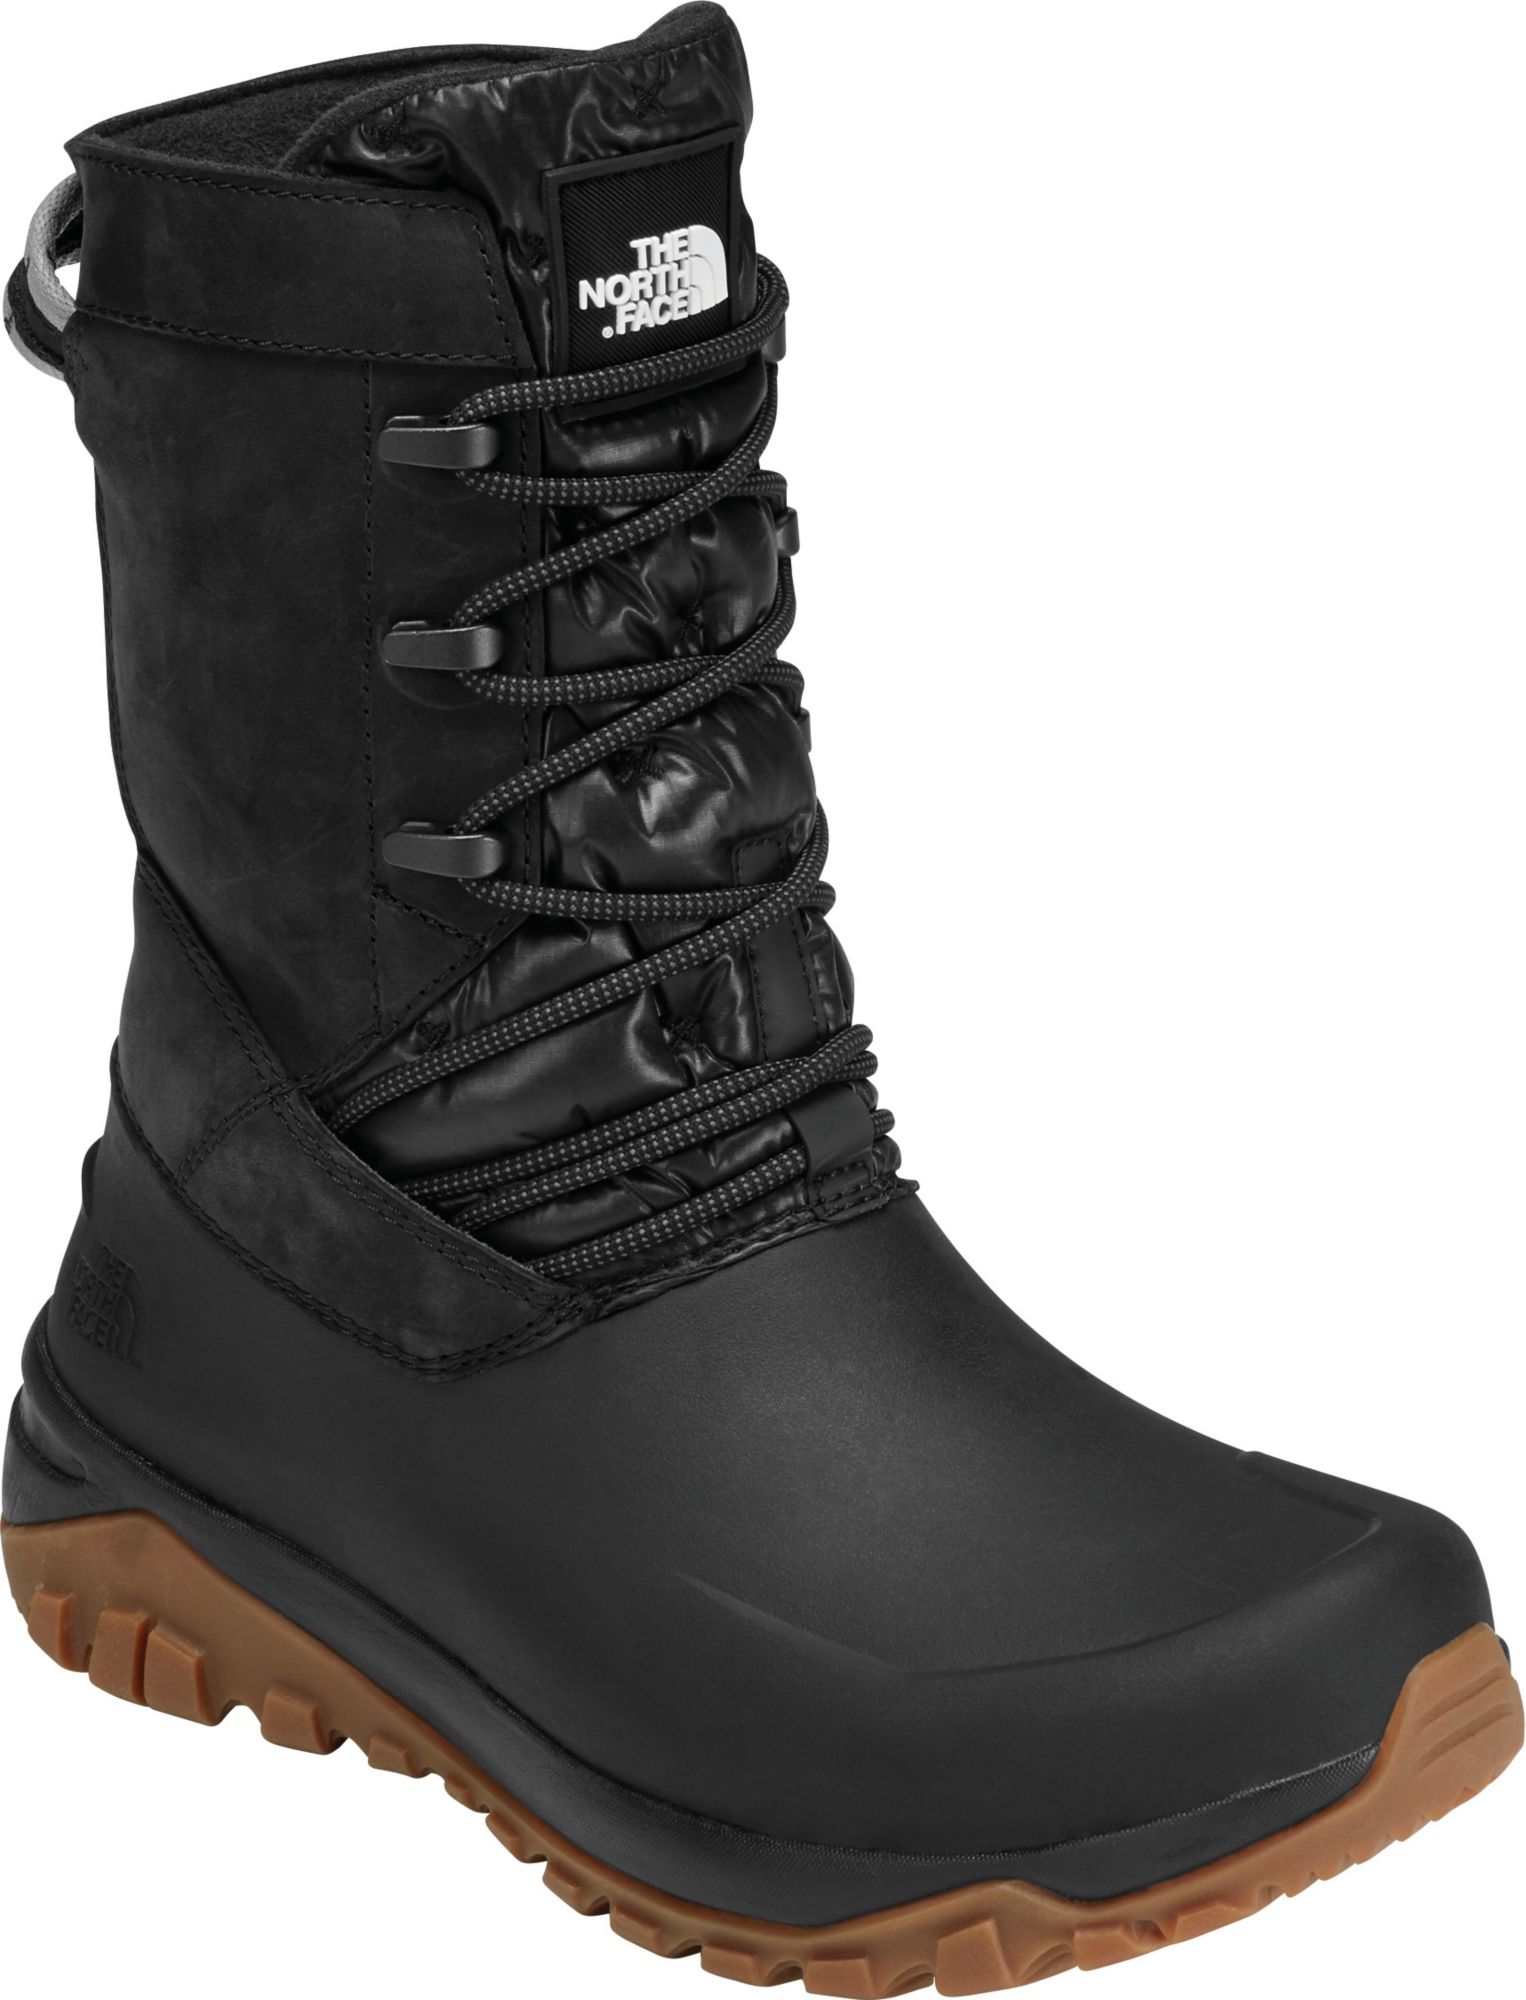 north face slip on winter boots